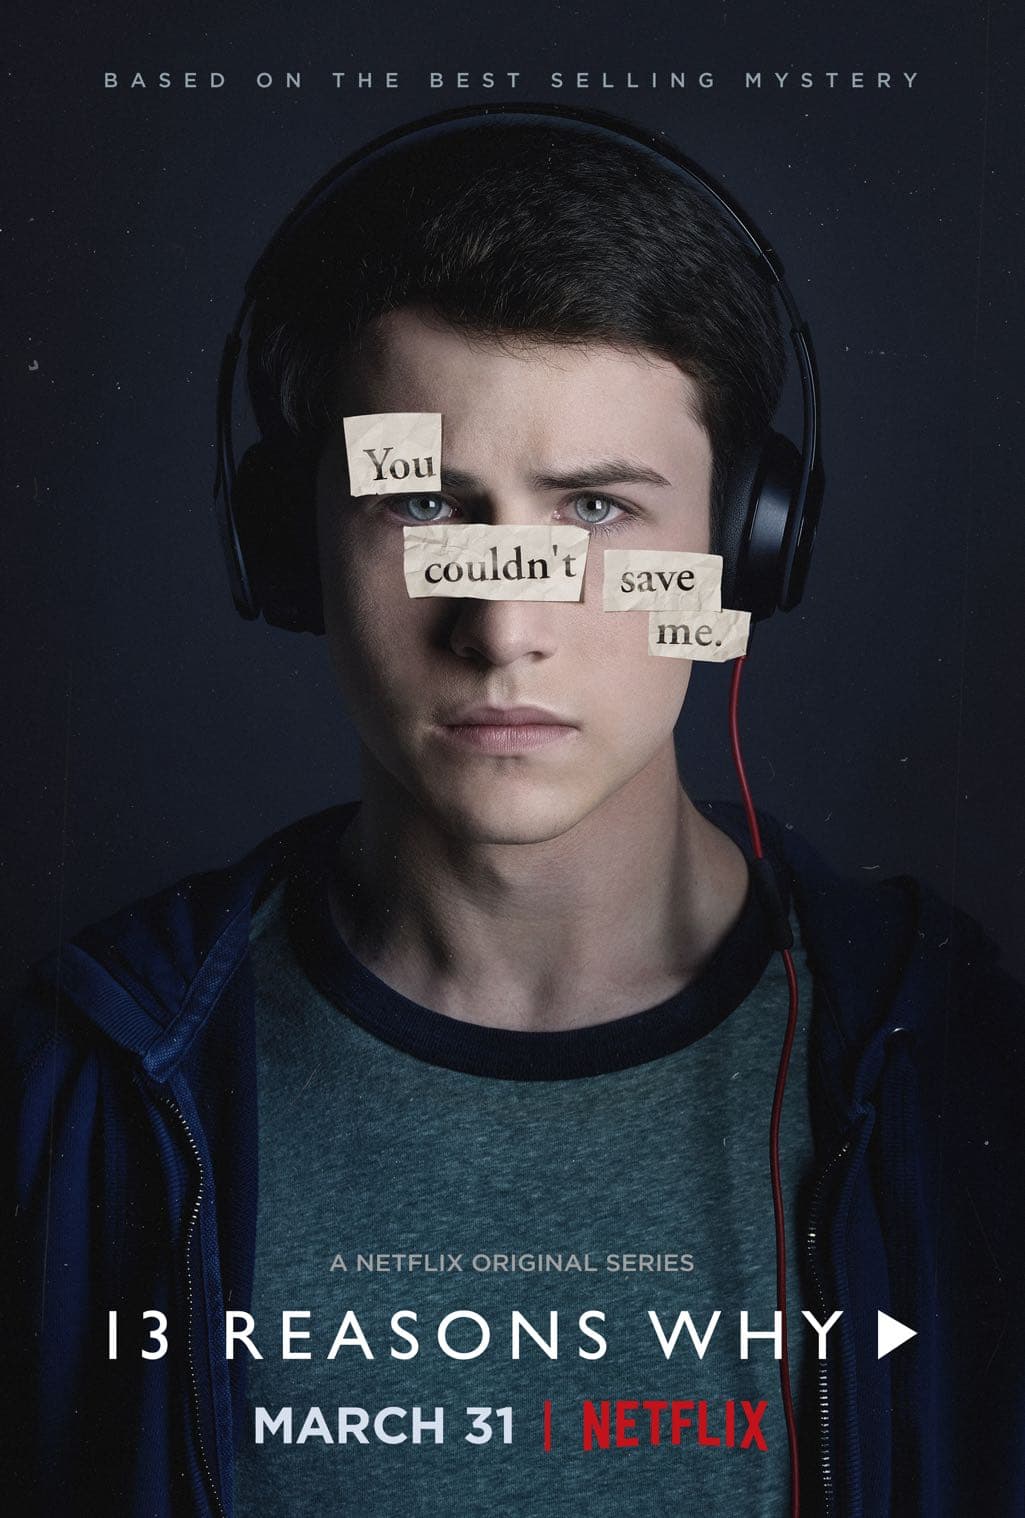 Reasons Why (Netflix Show) image Dylan Minnette as Clay Jensen